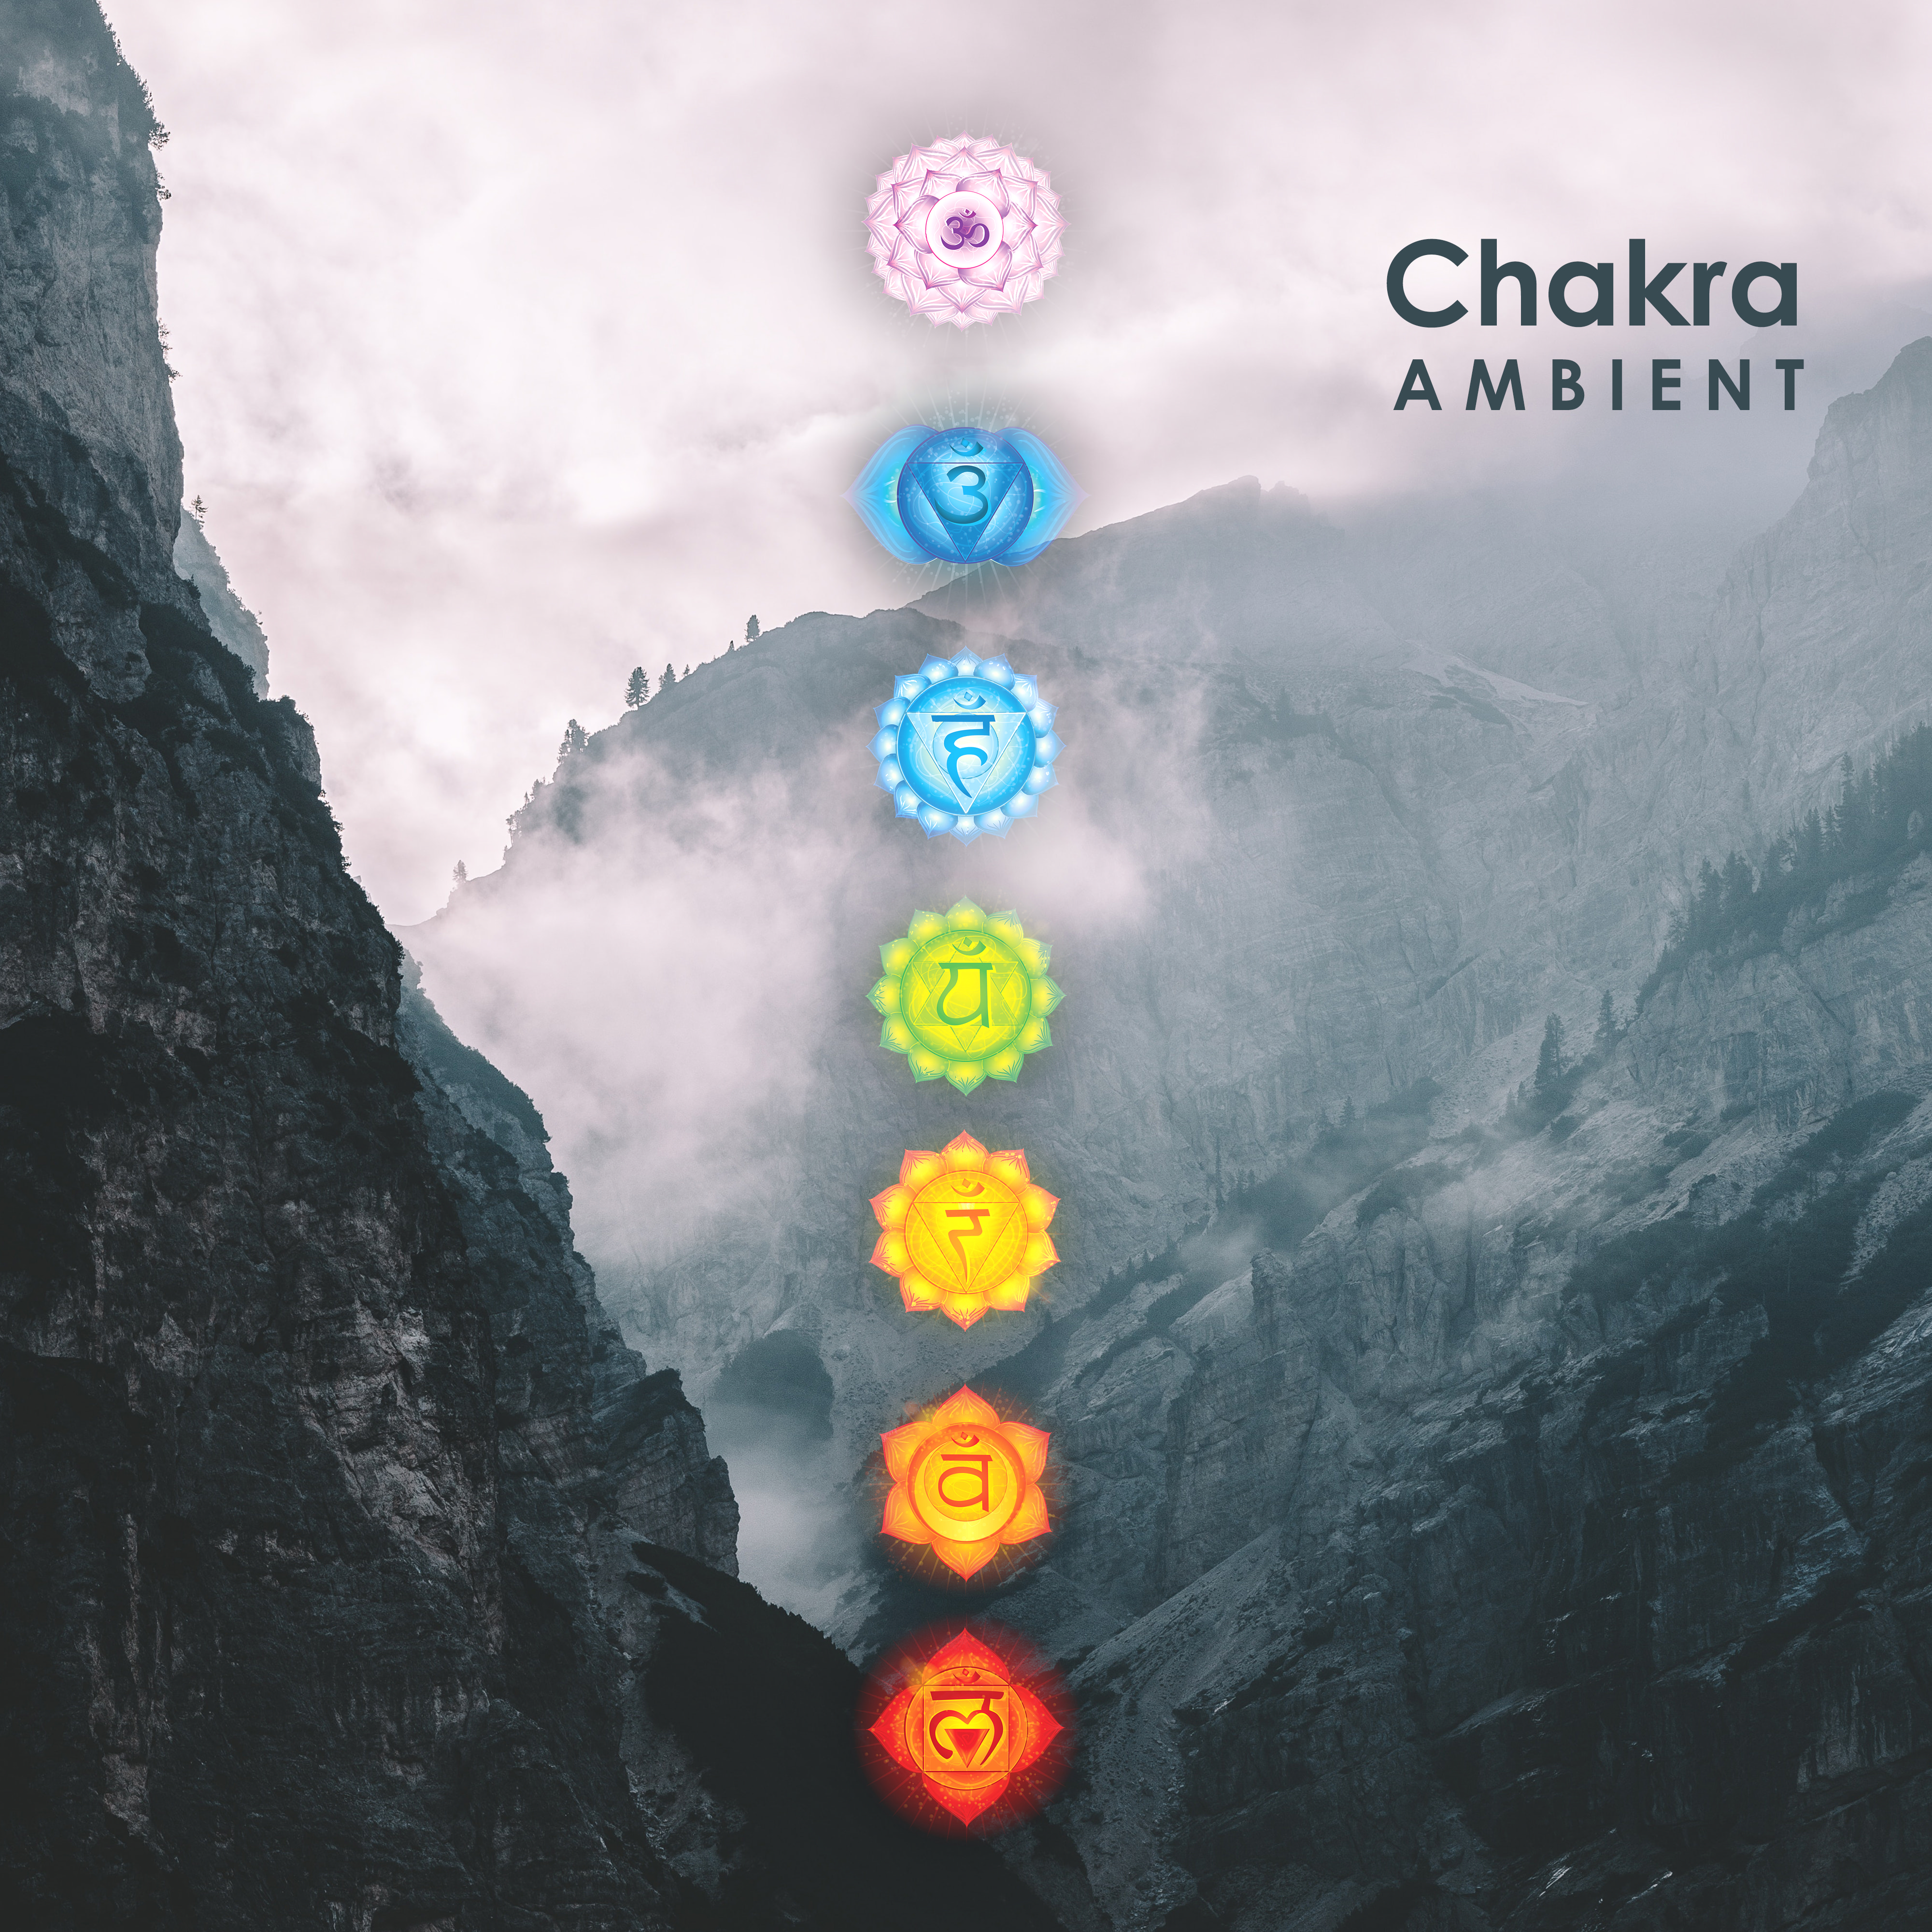 Chakra Ambient: Noise form New Age